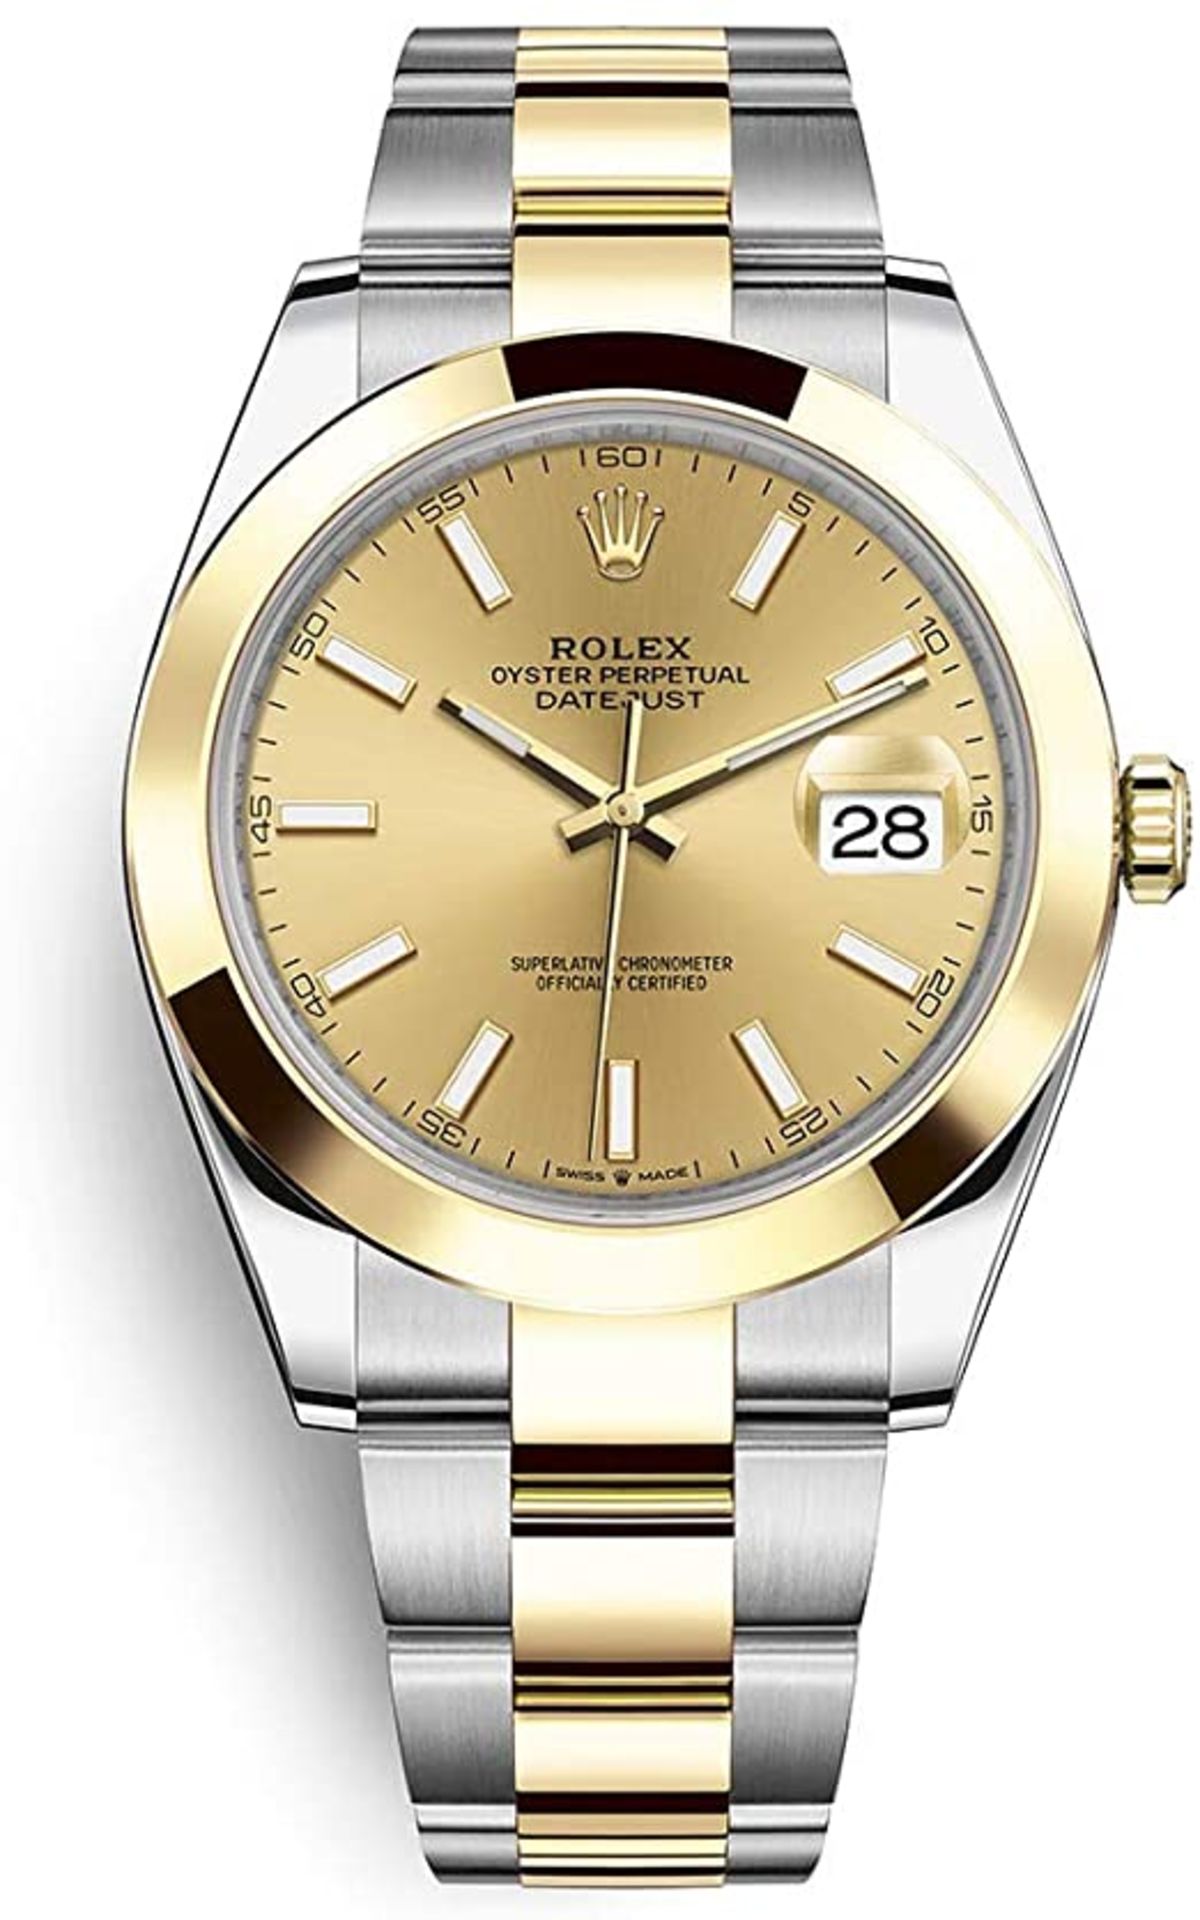 ** ON SALE ** Rolex Date-Just 36mm Oystersteel And Yellow Gold 2021 ** Brand New **